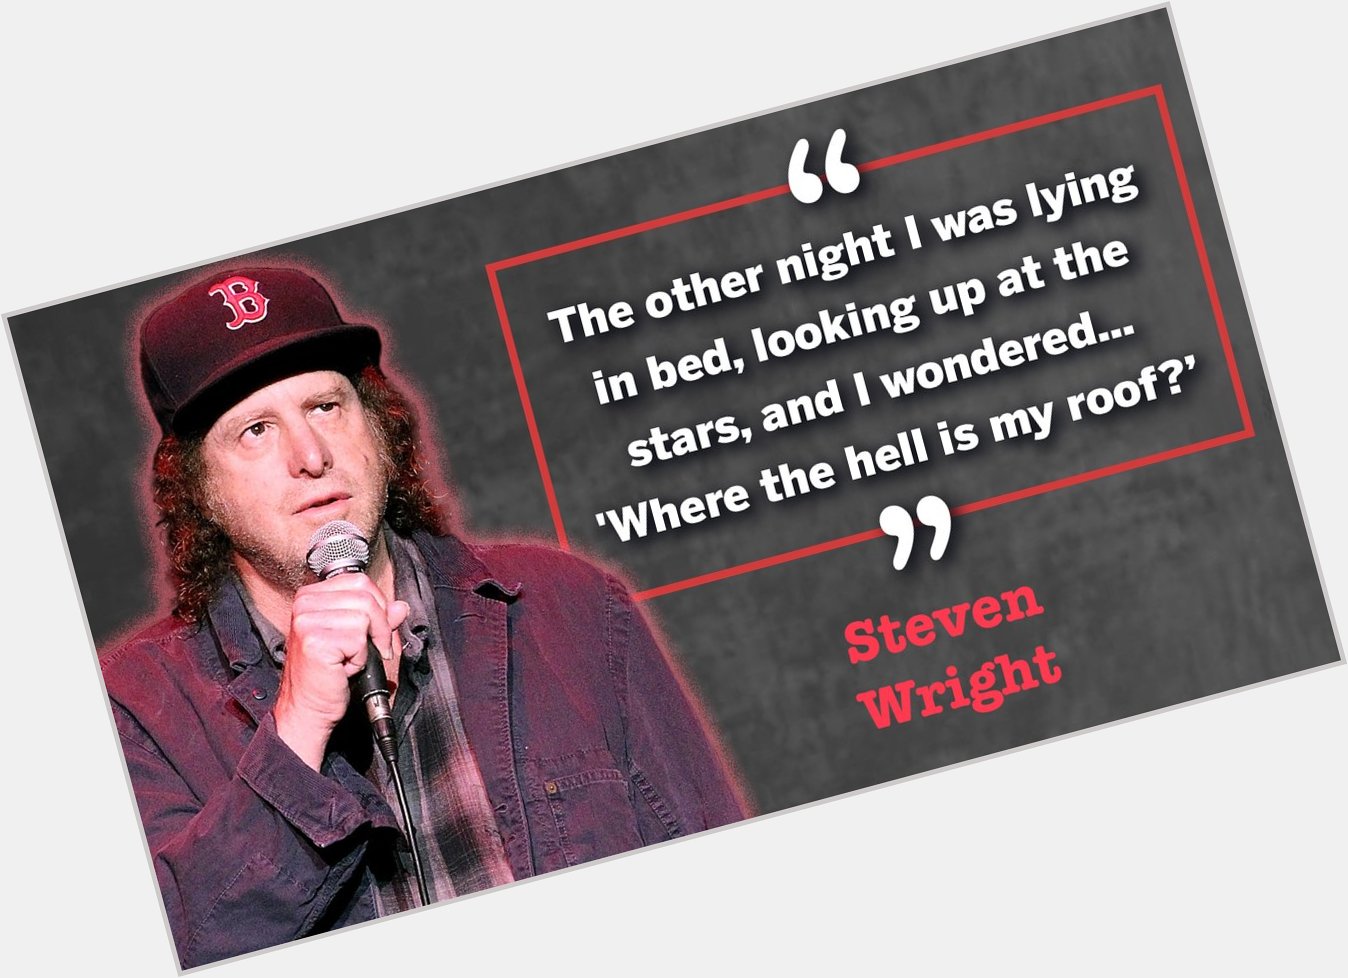 Happy birthday to the one and only Steven Wright! 